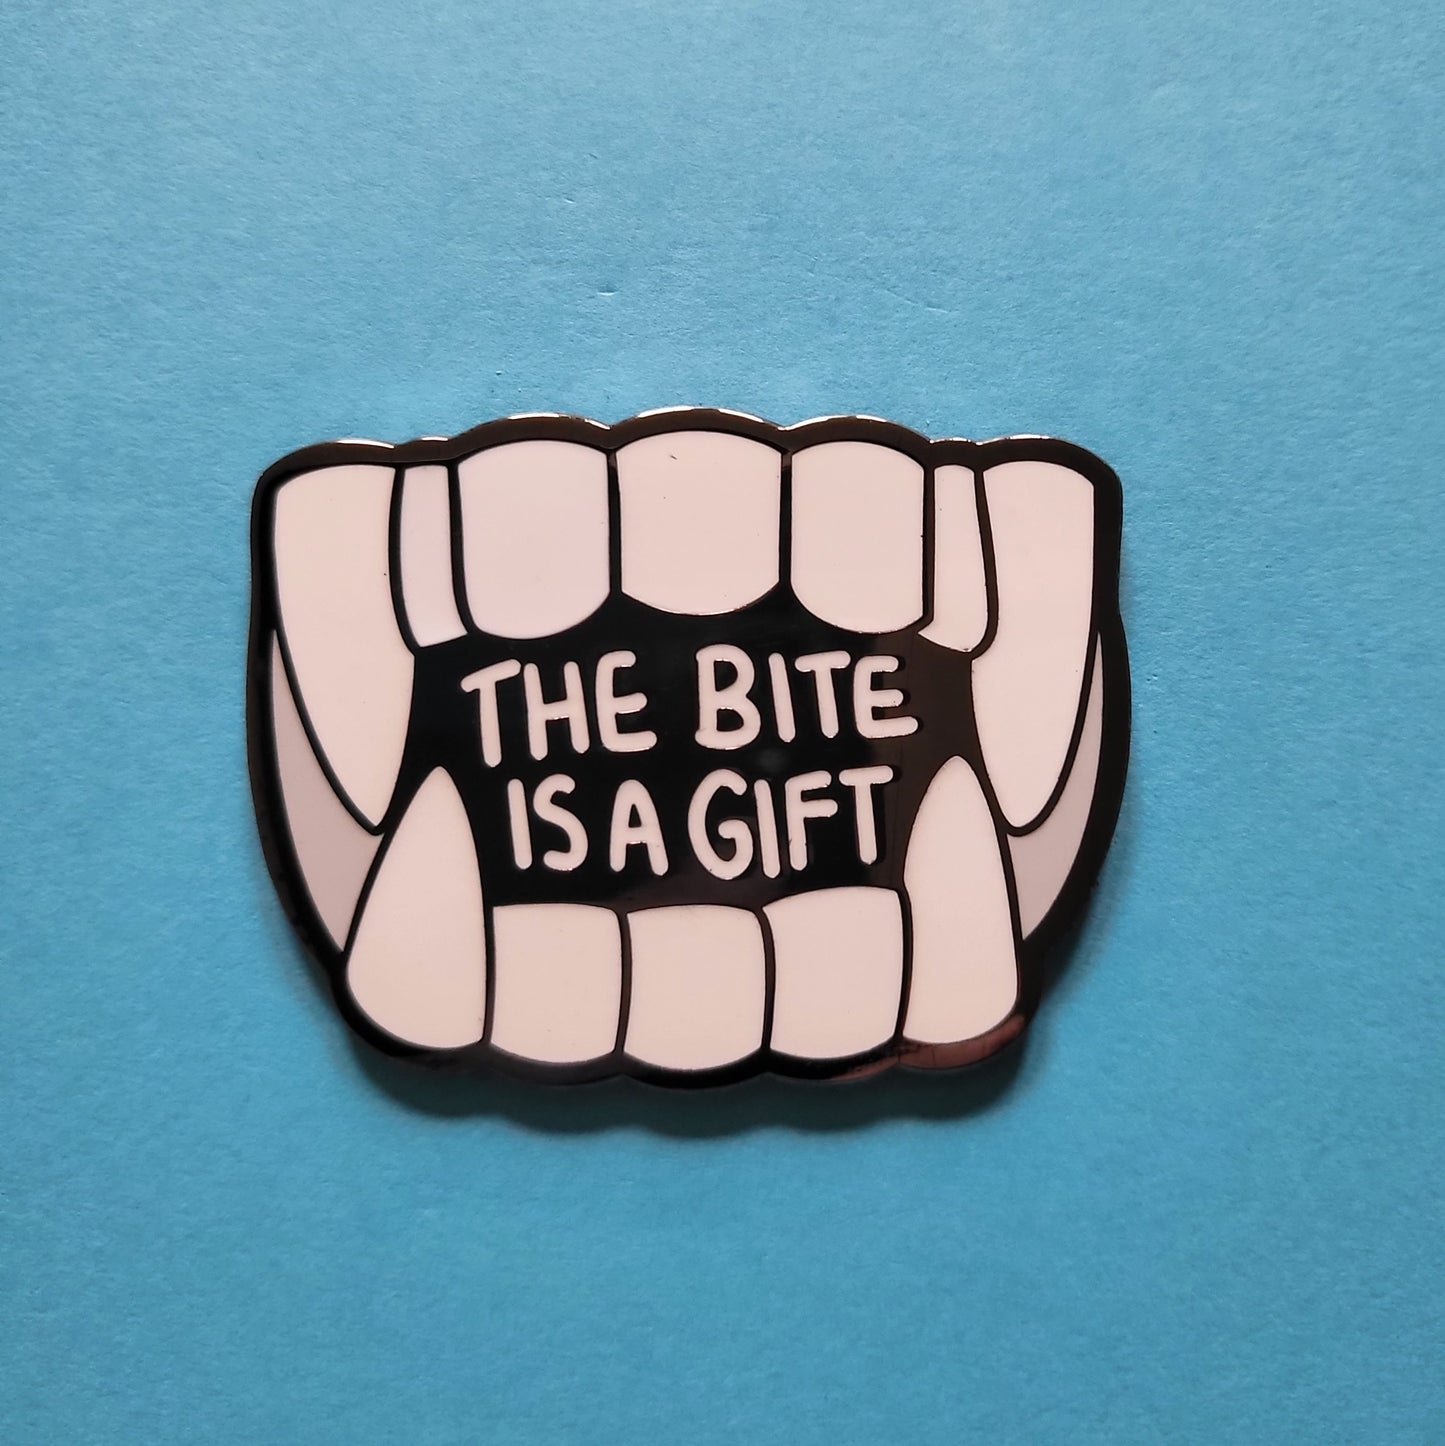 The Bite is A Gift Hard Enamel Pin